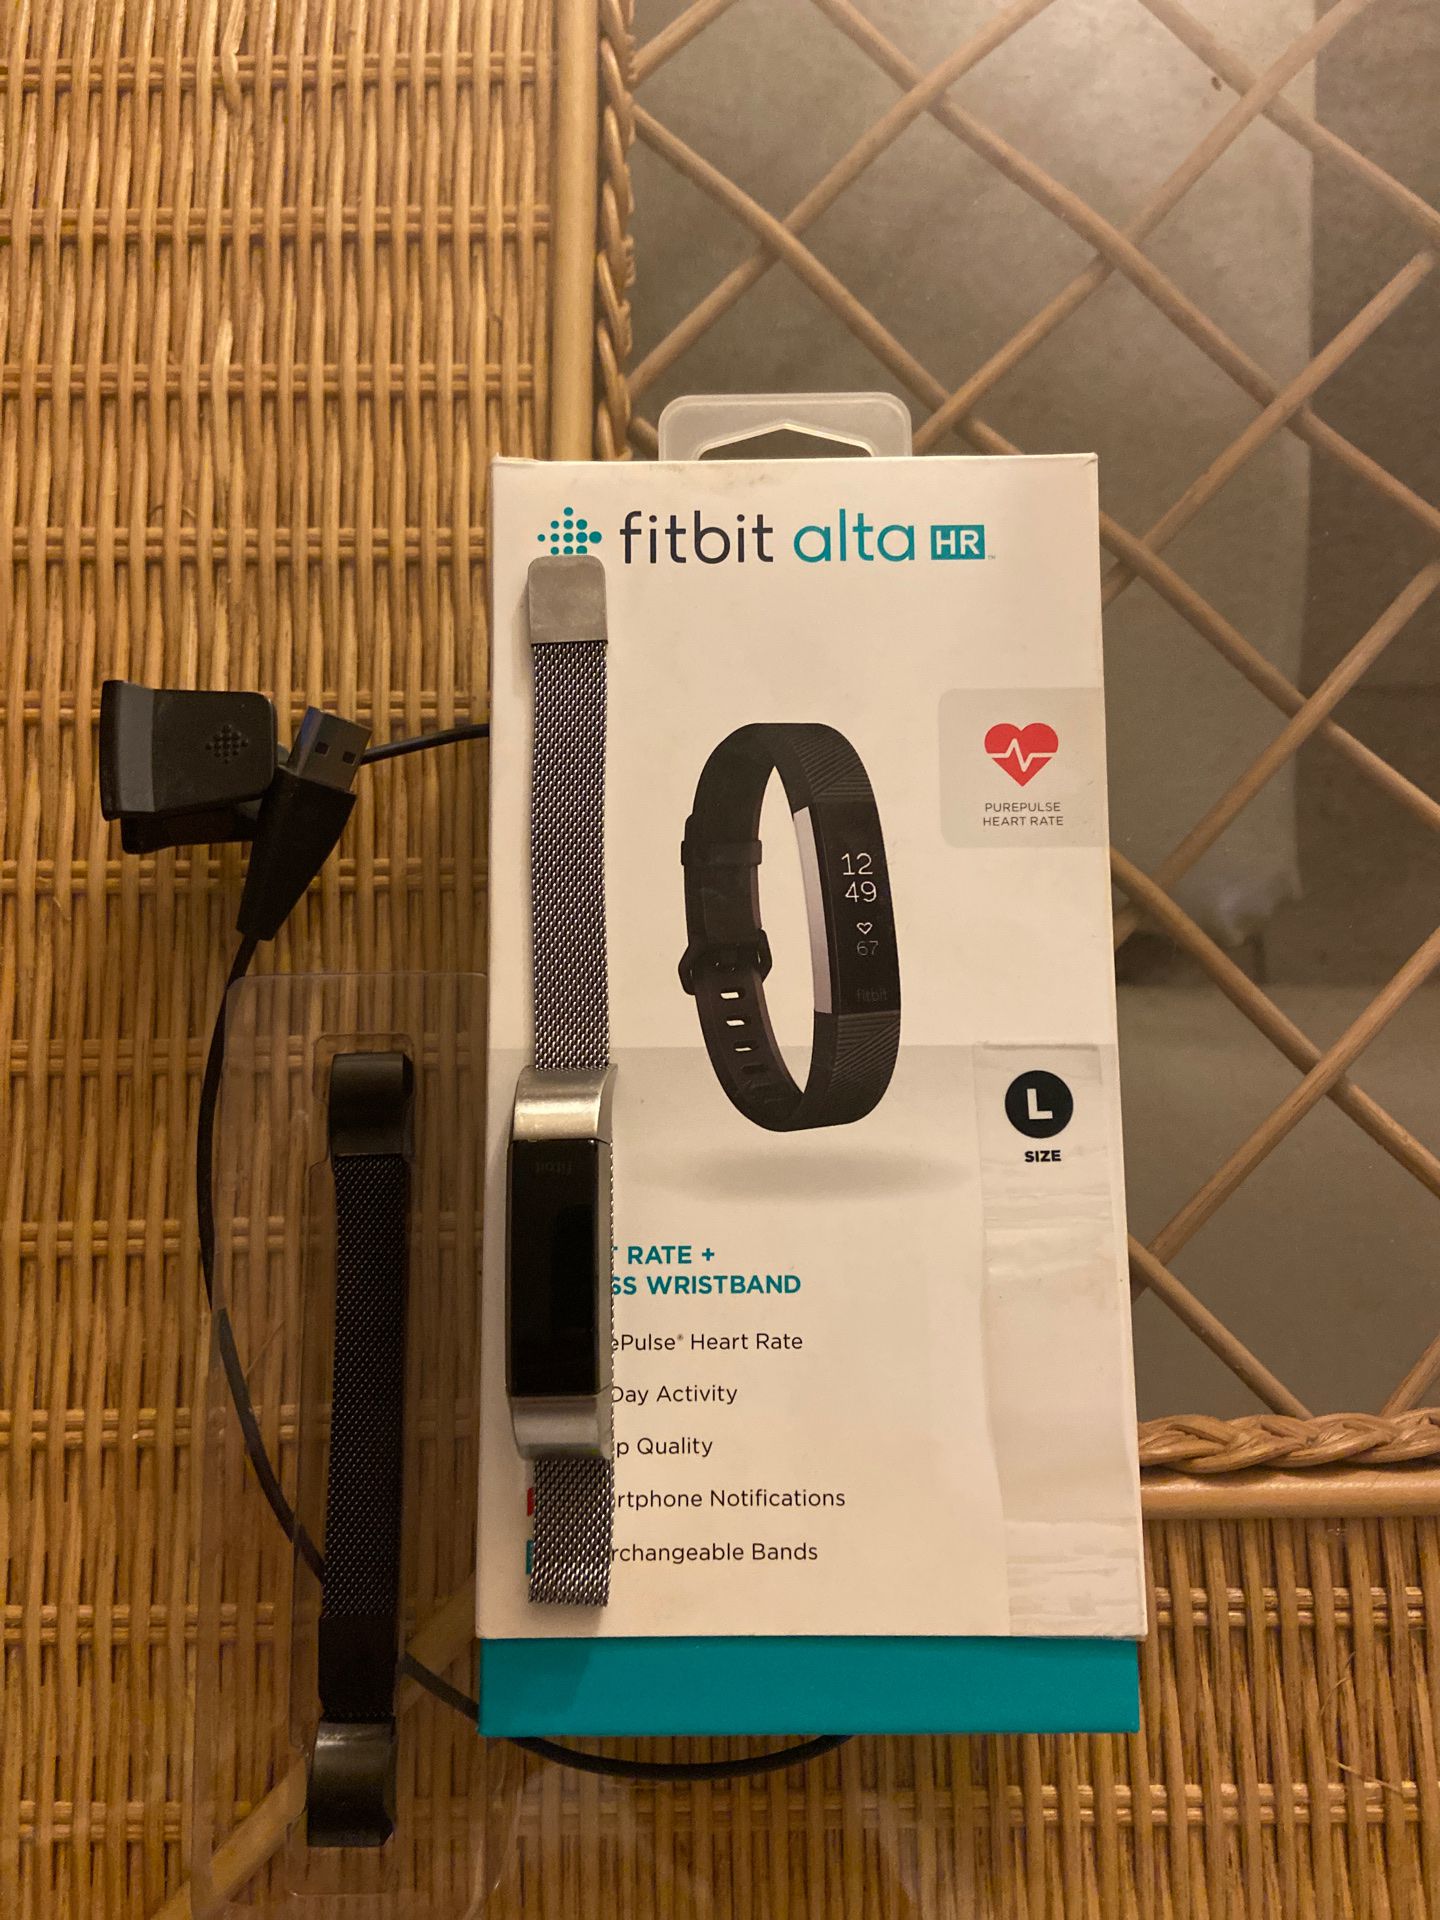 FITBIT ALTA HR..HEART RATE FITNESS WRISTBAND IN EXCELLENT CONDITION